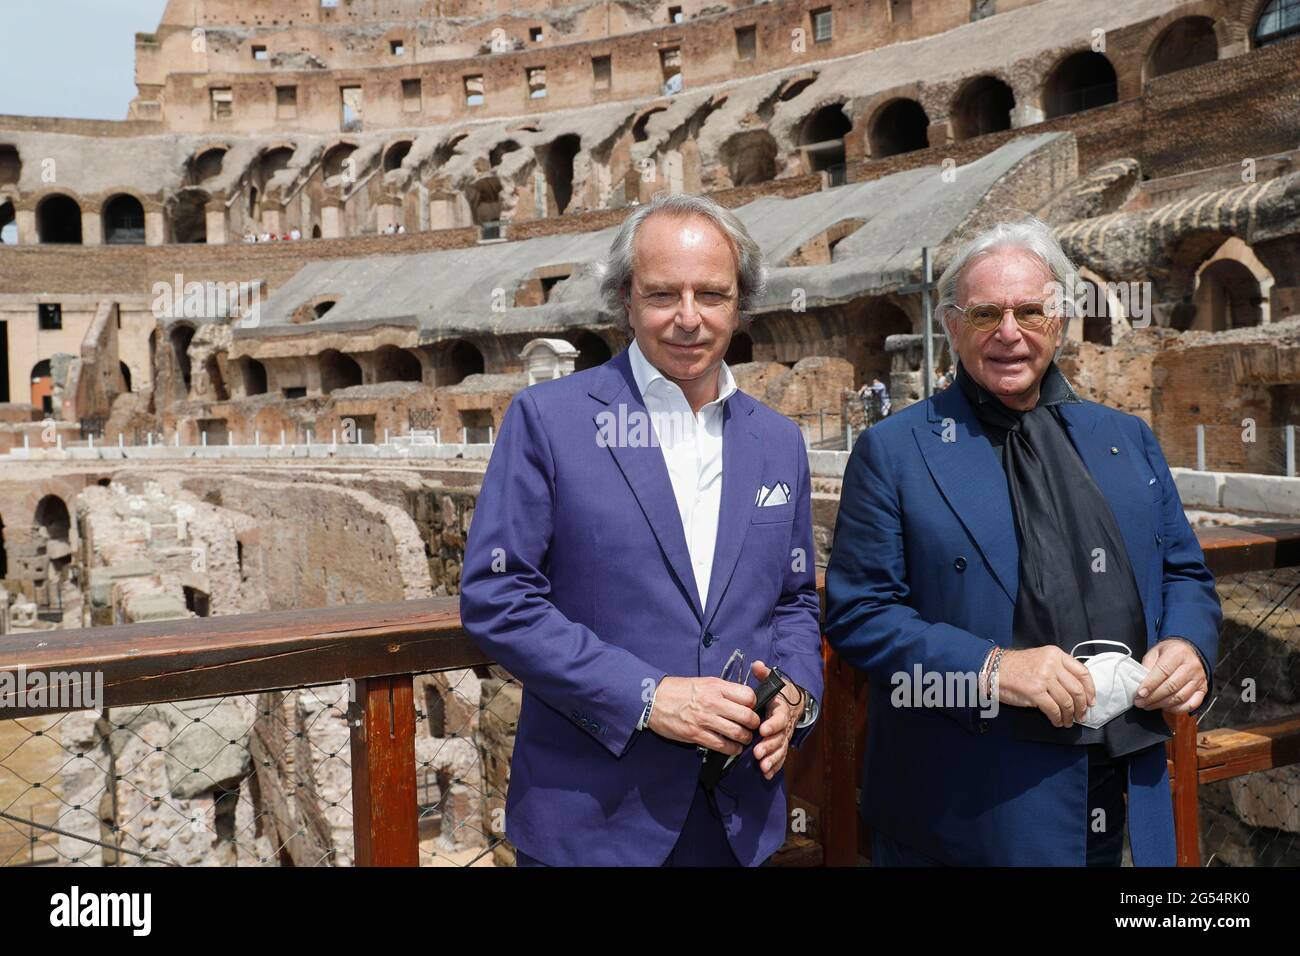 Italy, Rome, june 25, 2021 : Presentation of the restoration of the Colosseum hypogea, funded by the italian fashion group Tod's. (L-R) Andrea della Valle, vice president and CEO of Tod's group and Diego Della Valle, president of Tod's    Photo Remo Casilli/Sintesi/Alamy Live News Stock Photo